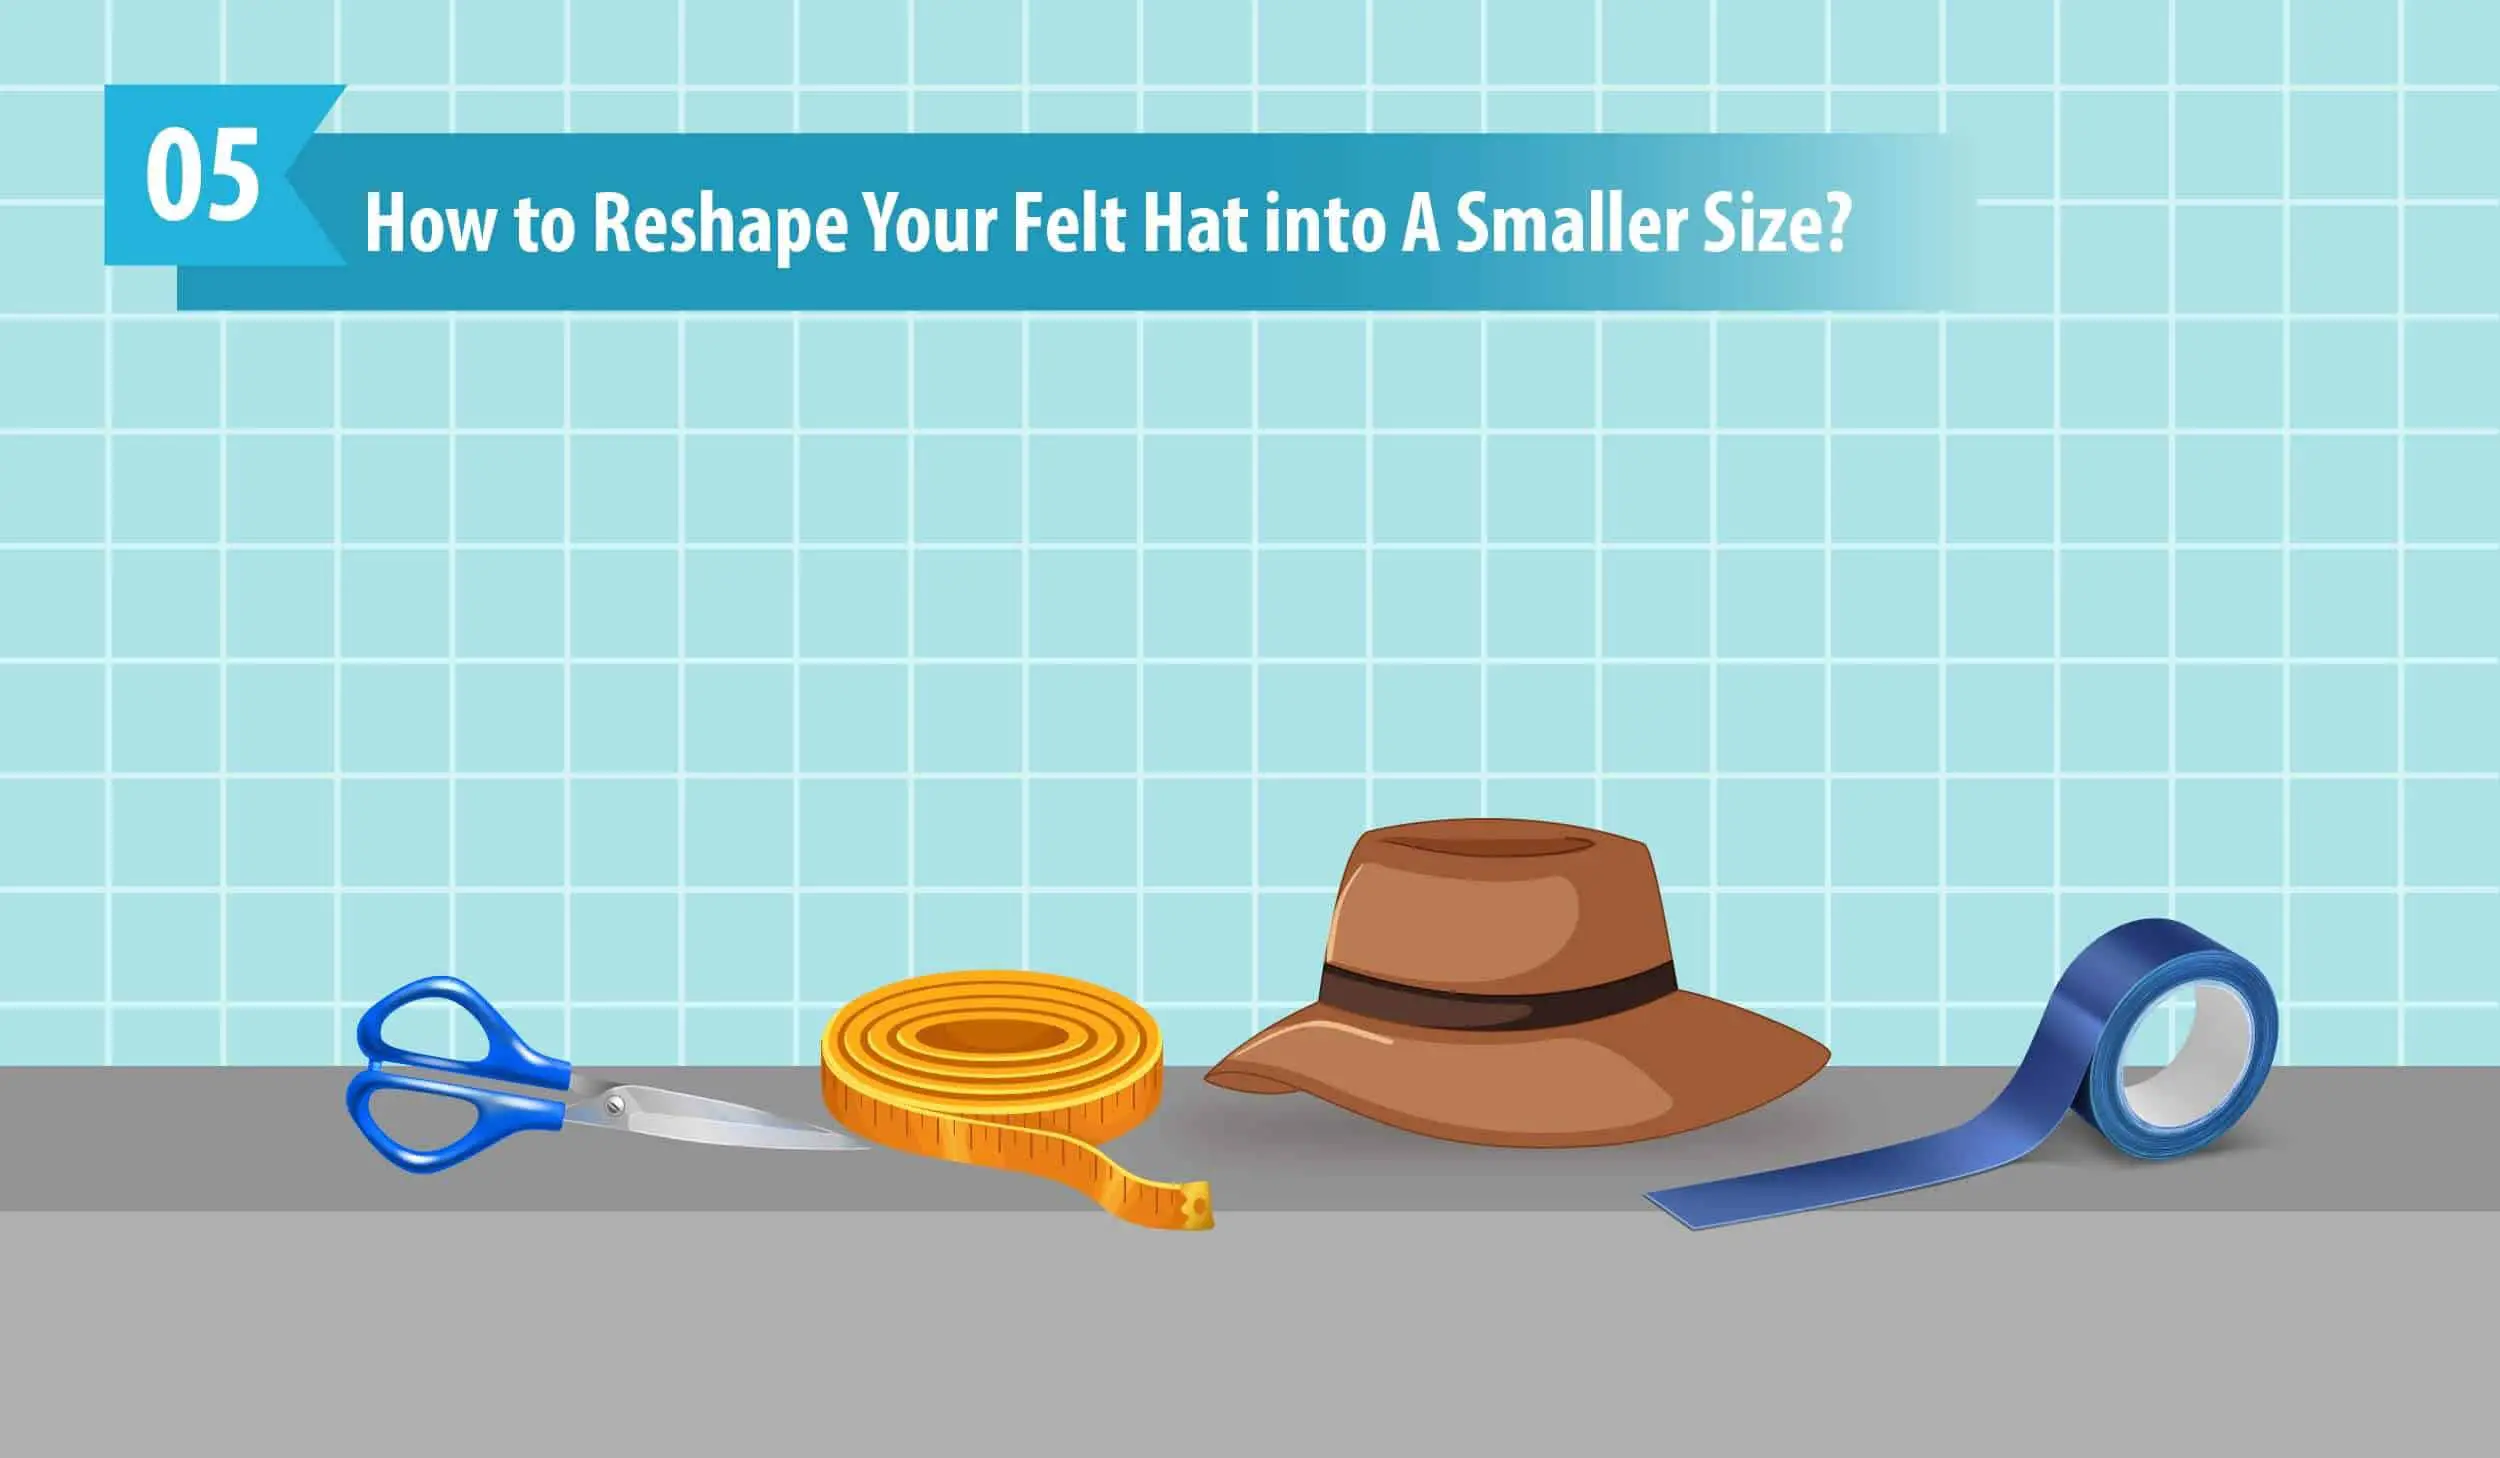 How to Reshape Your Felt Hat into A Smaller Size